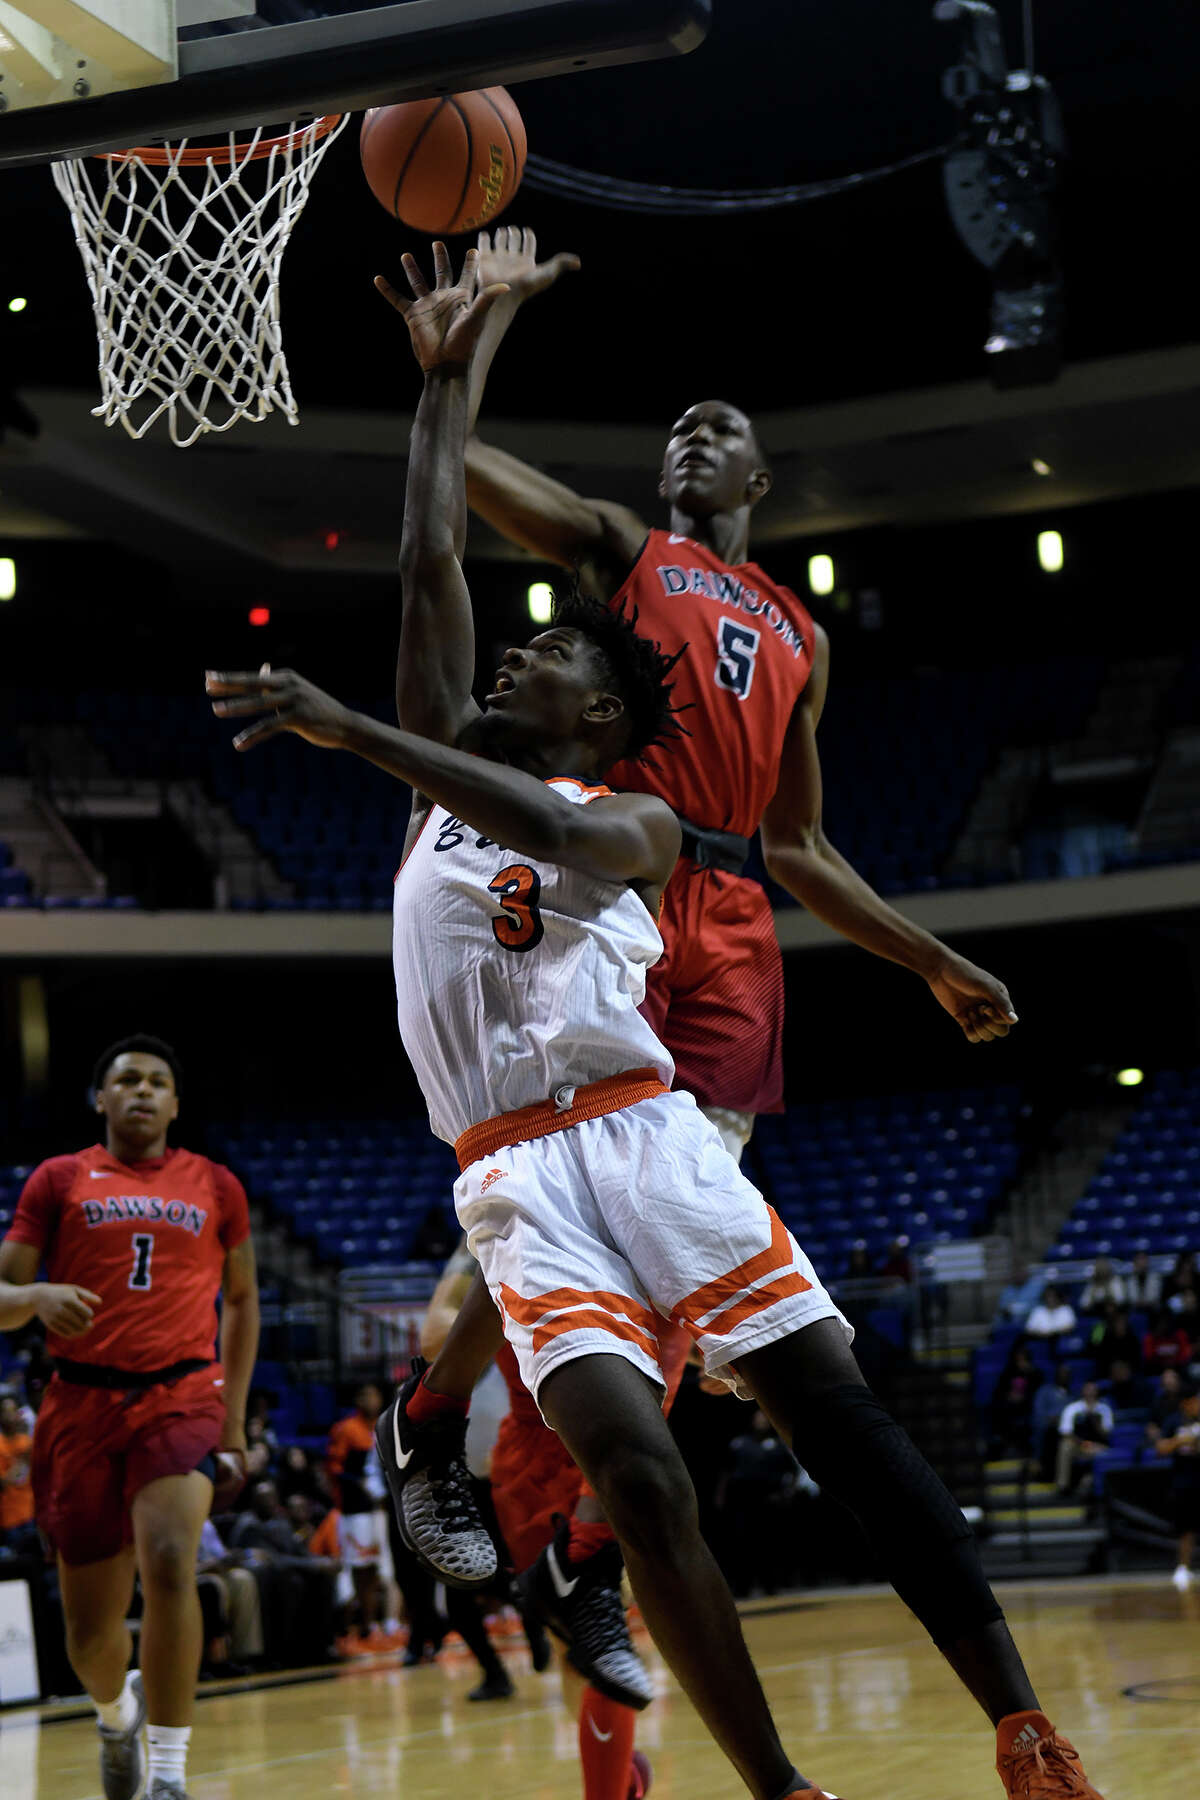 Fort Bend Bush senior forward Trevion Bradley shoots against Pearland Dawson senior forward Karl Nicholas (5) during the 1st quarter of their Class 6A Region III Boys Basketball semifinal at the Richard E. Berry Center in Cypress on Friday, March 3, 2017. (Photo by Jerry Baker/Freelance)